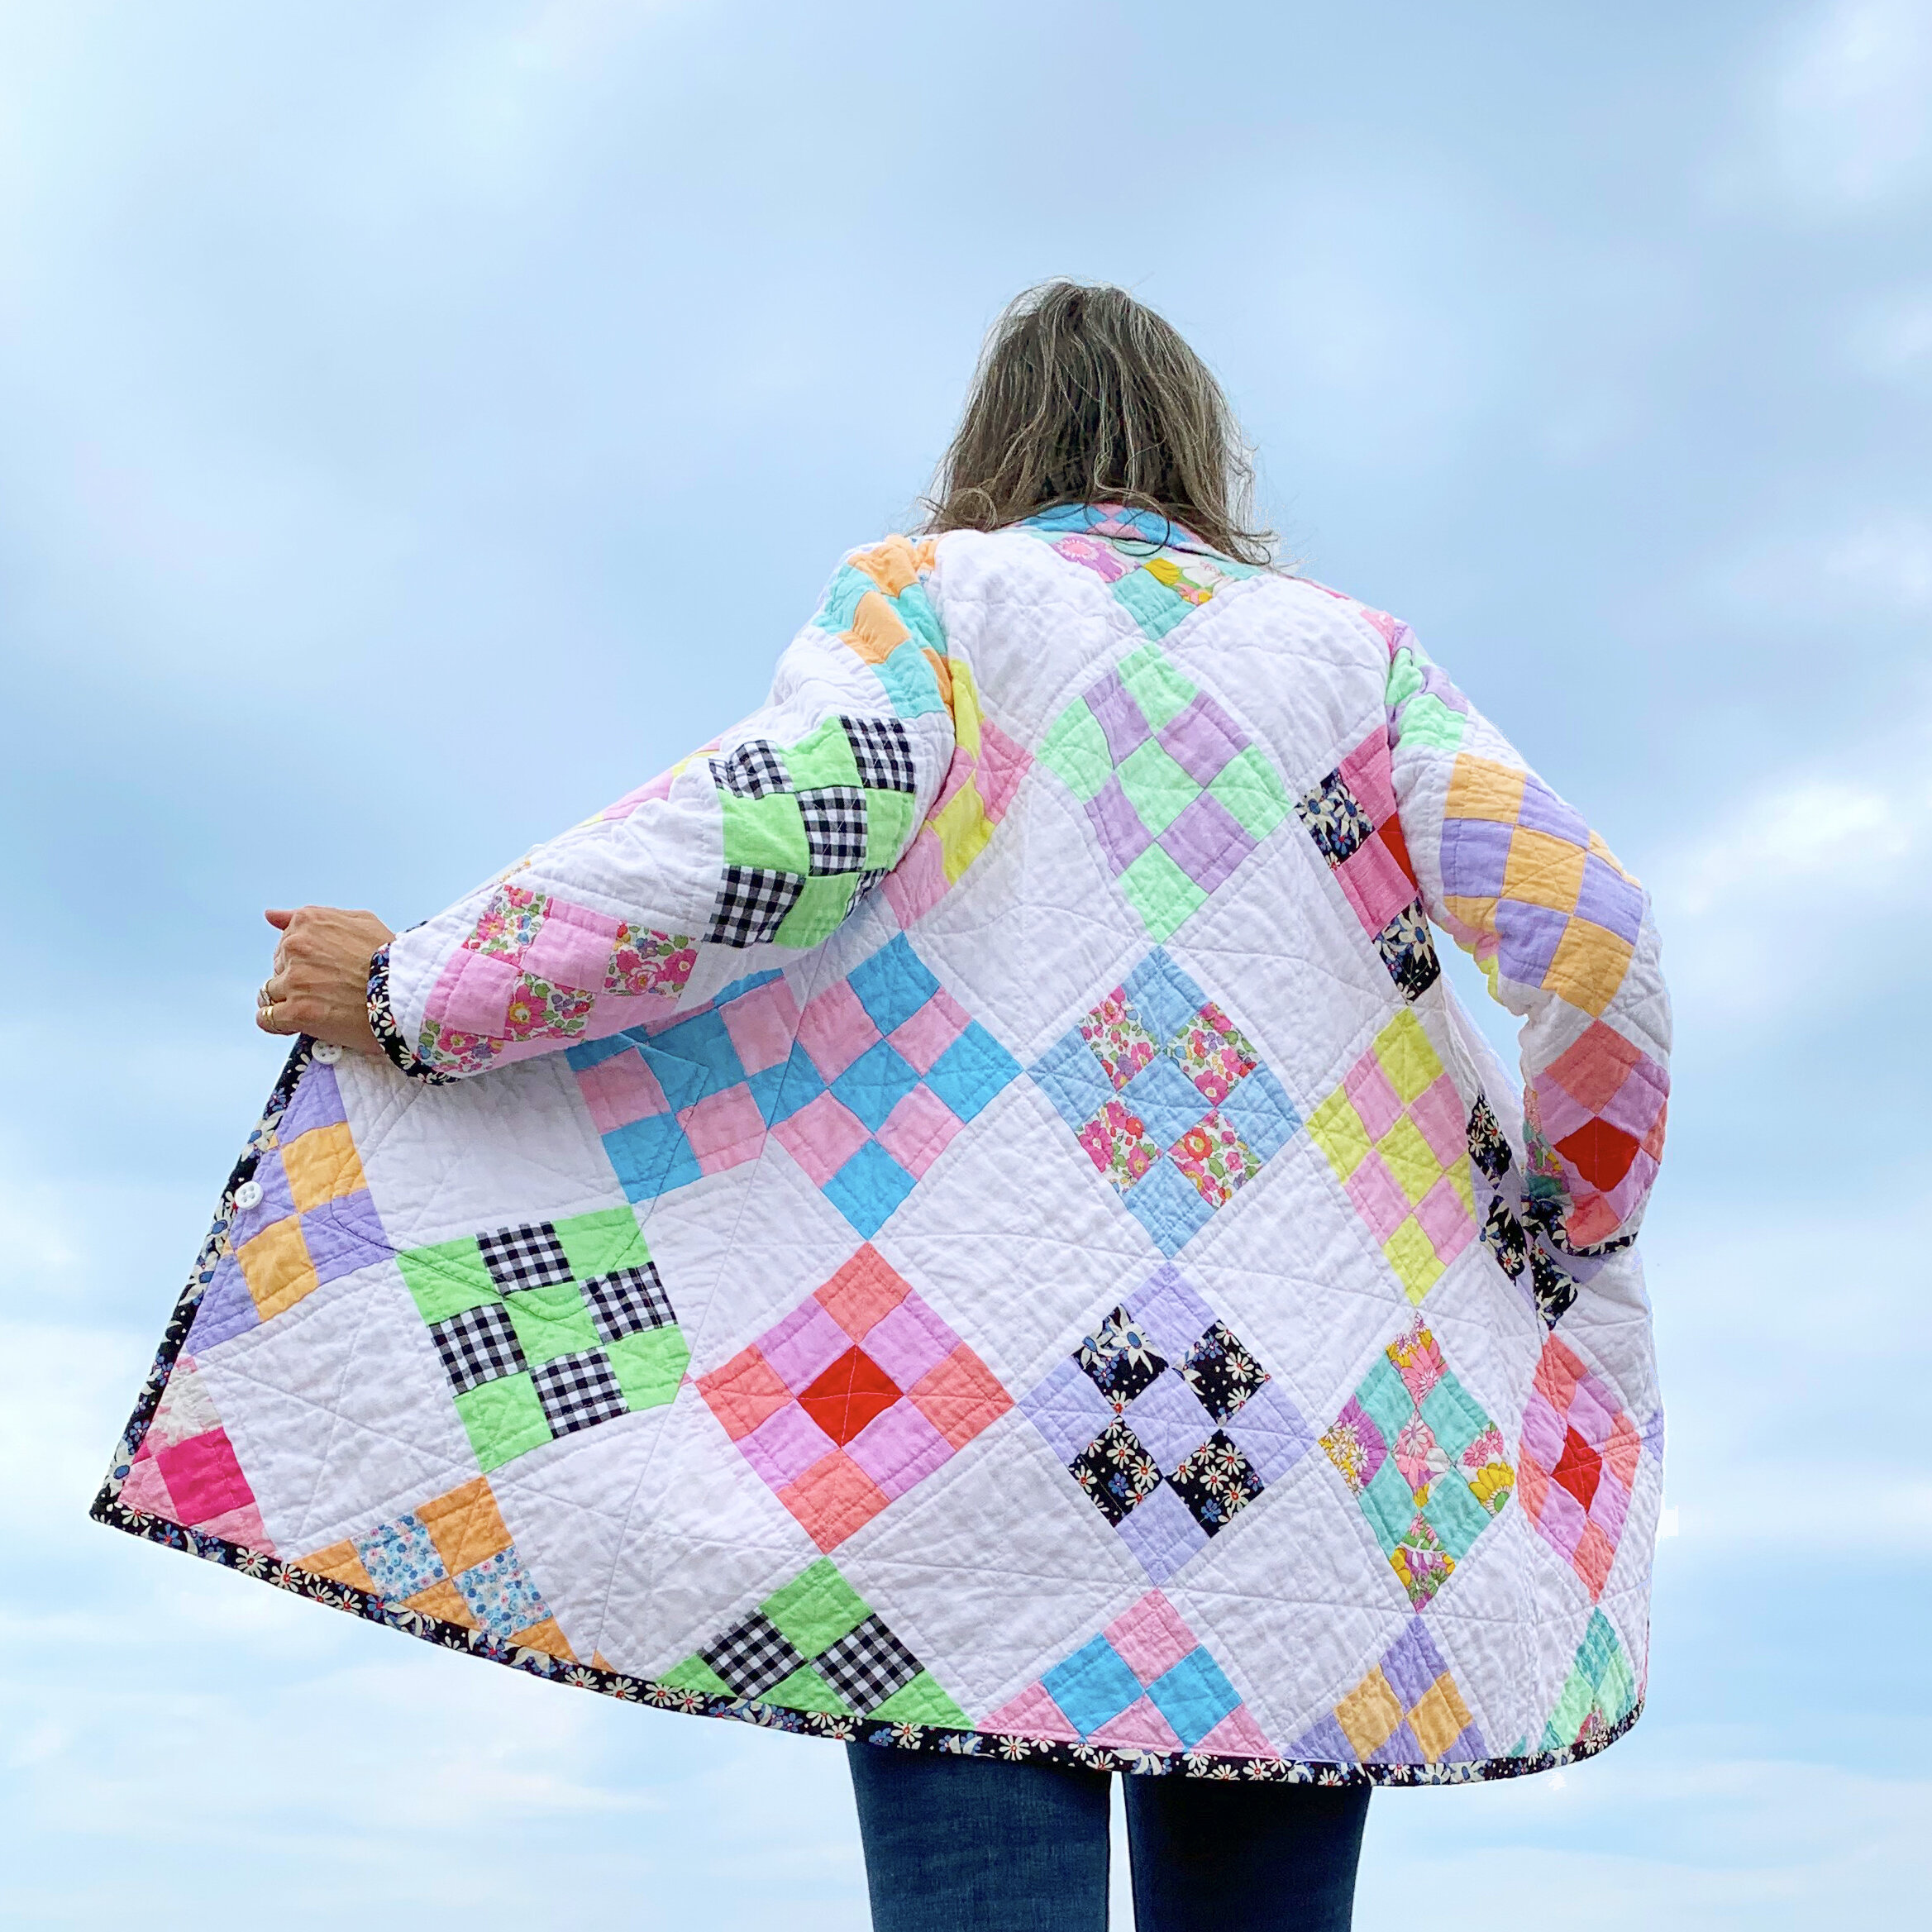 MY QUILTED DREAM COAT: Part 4, Wearing the Coat! — BURIED DIAMOND